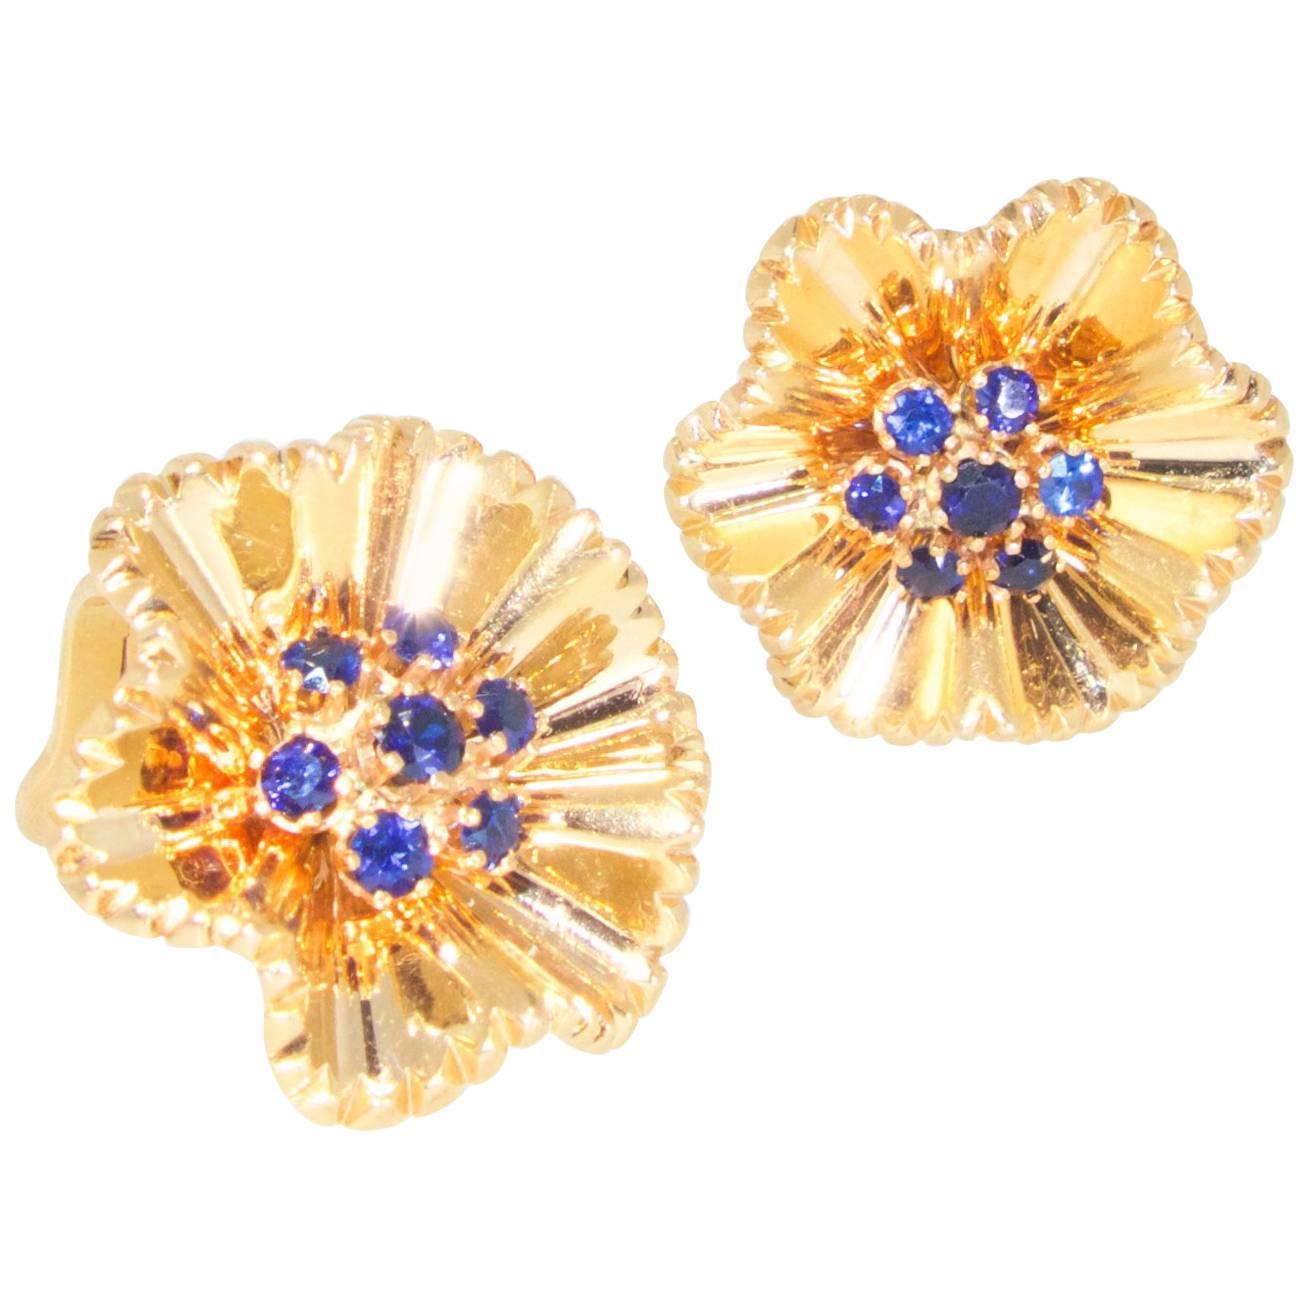 Retro Gold and Sapphire Earrings